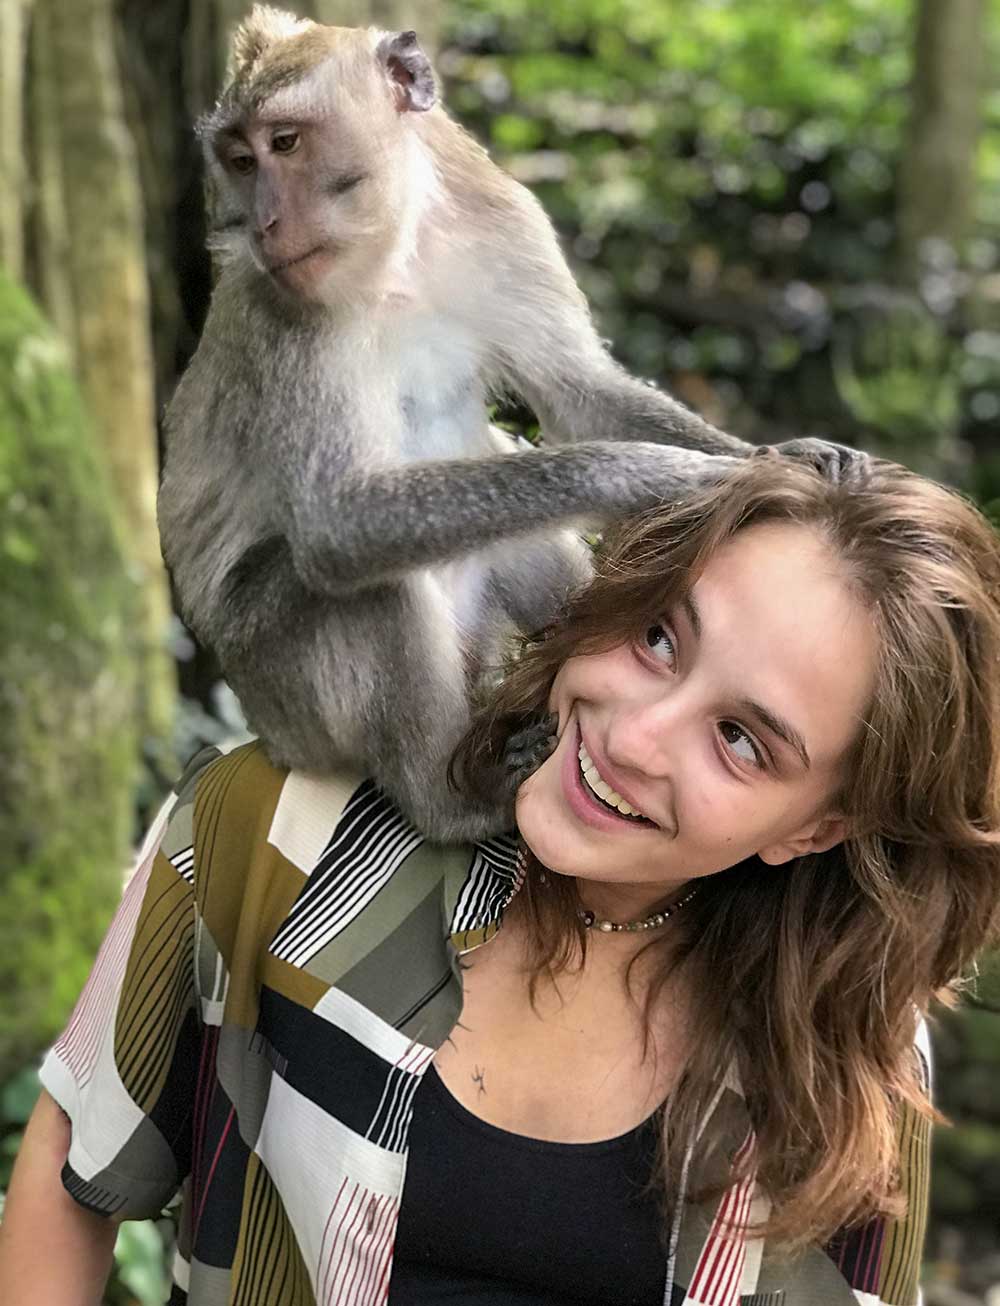 Paisia Warhaft with a monkey on her shoulder